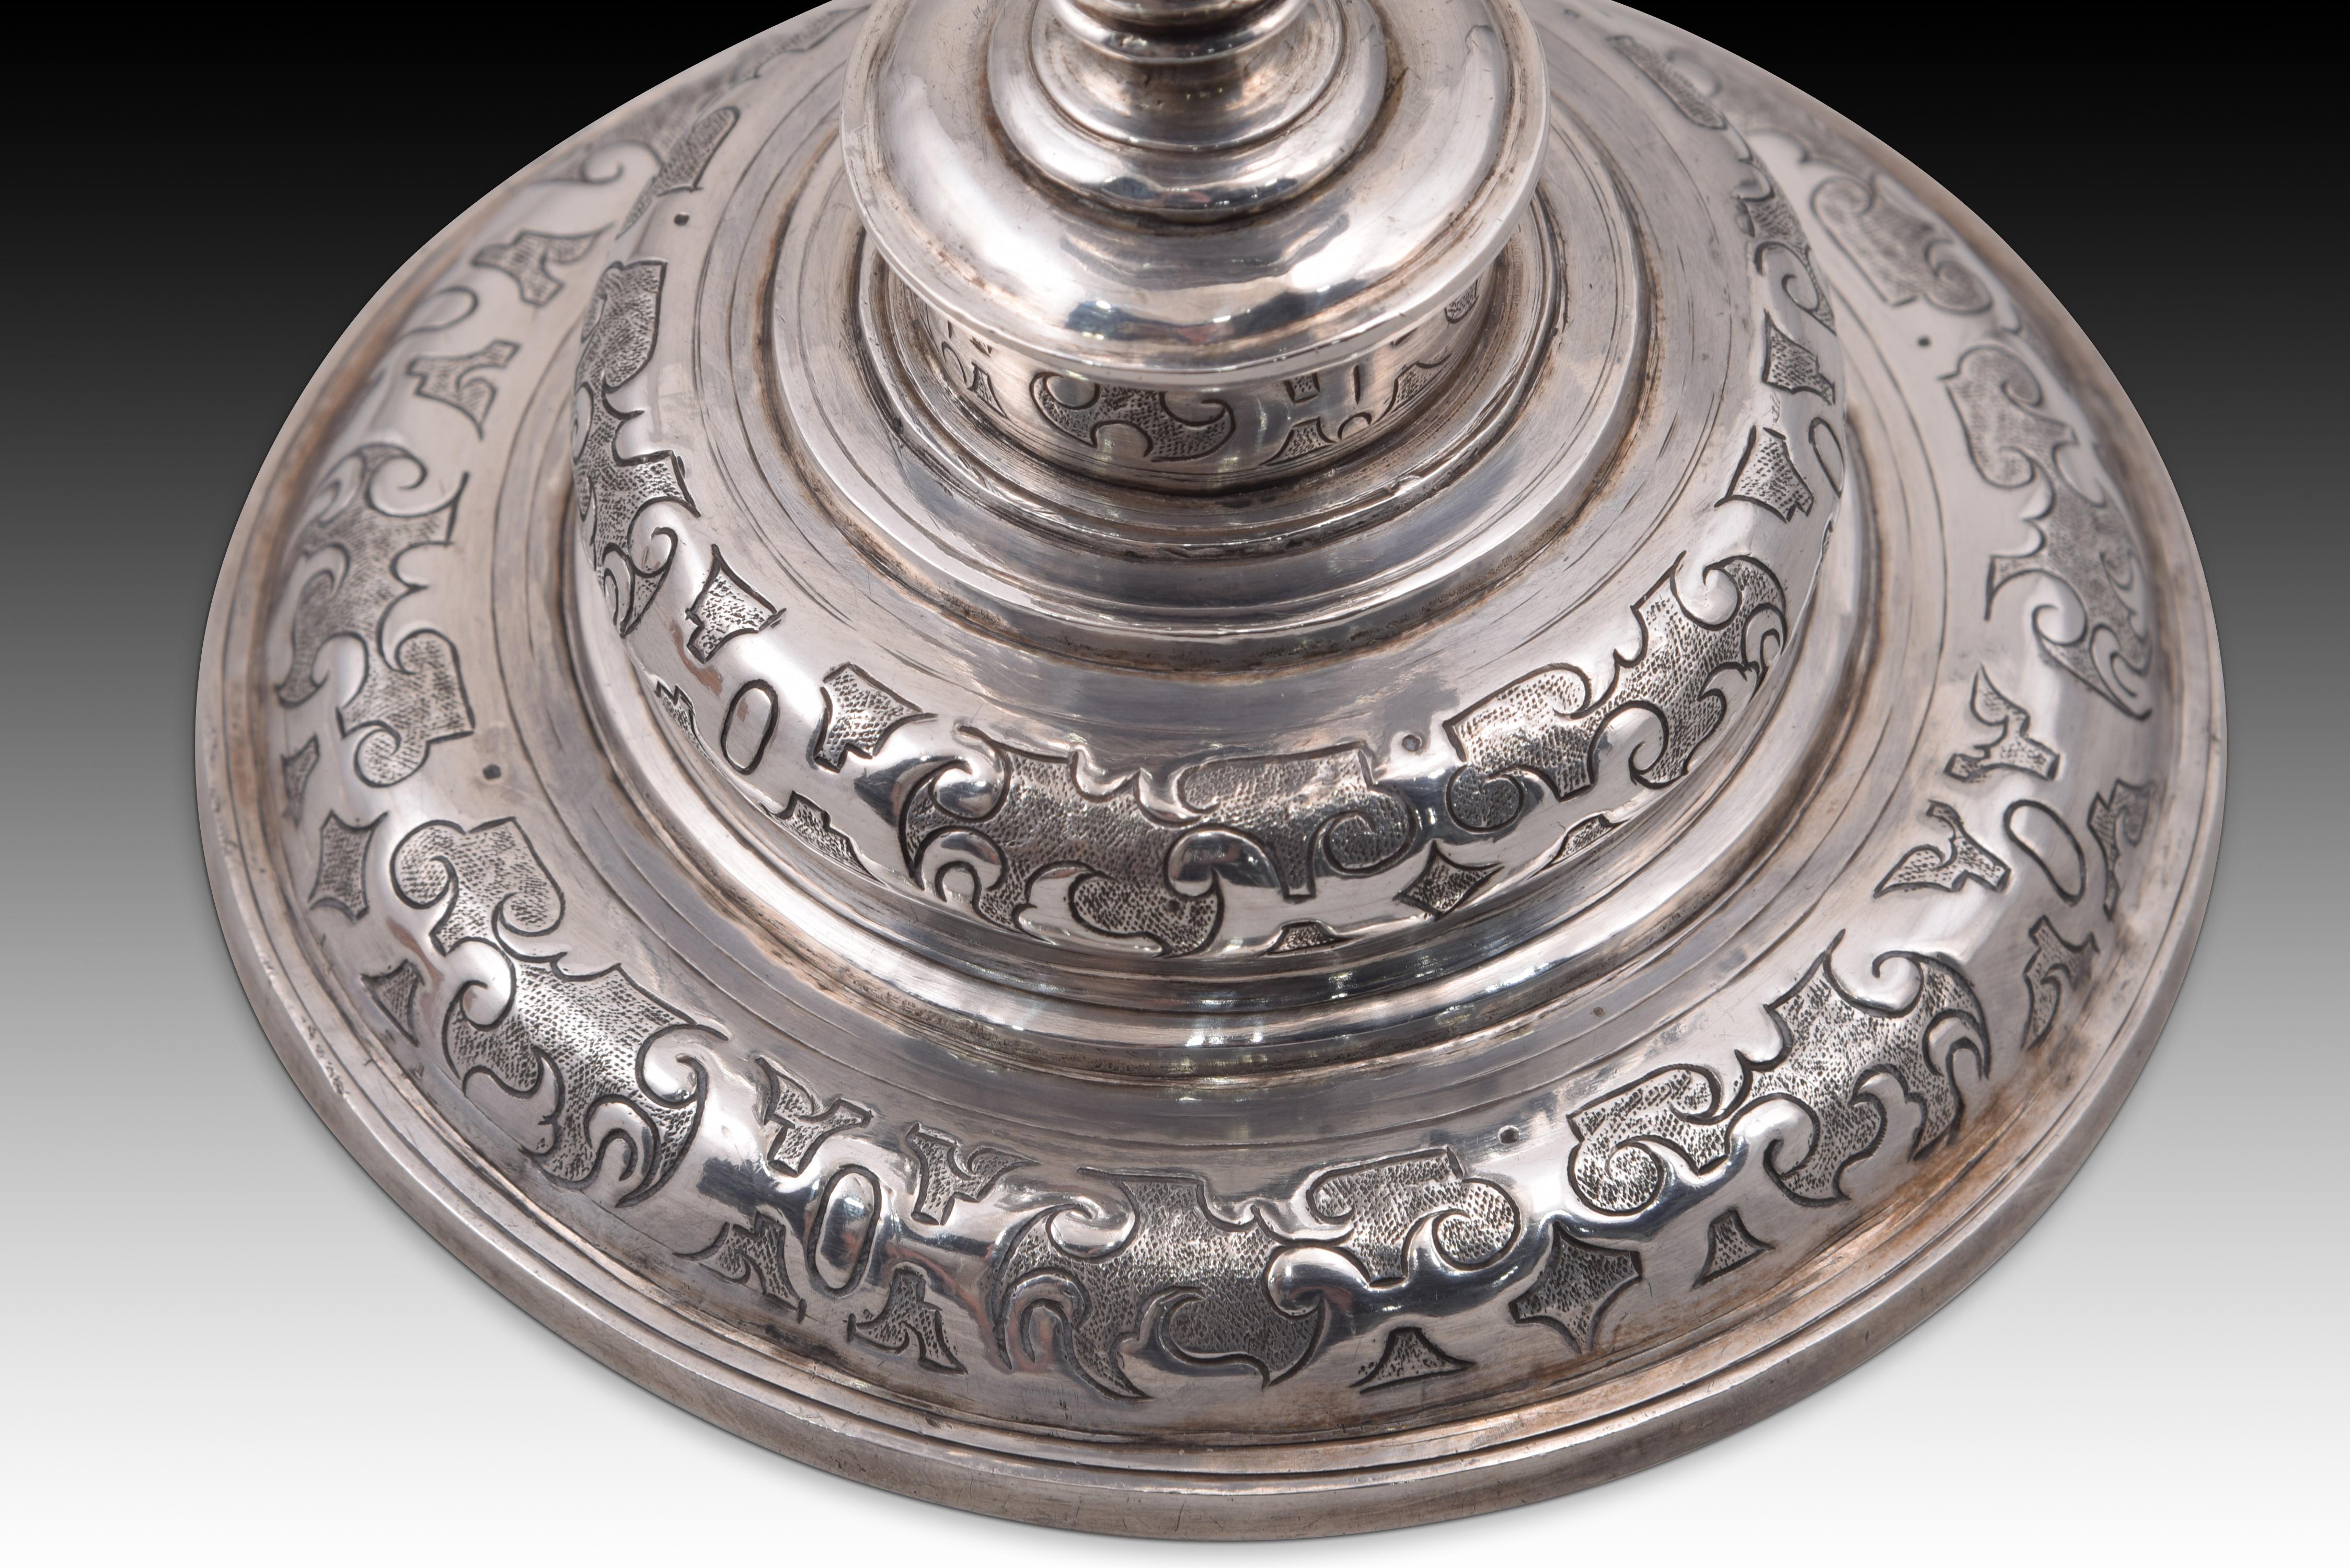 Silver Solid silver chalice. Spain, 17th century